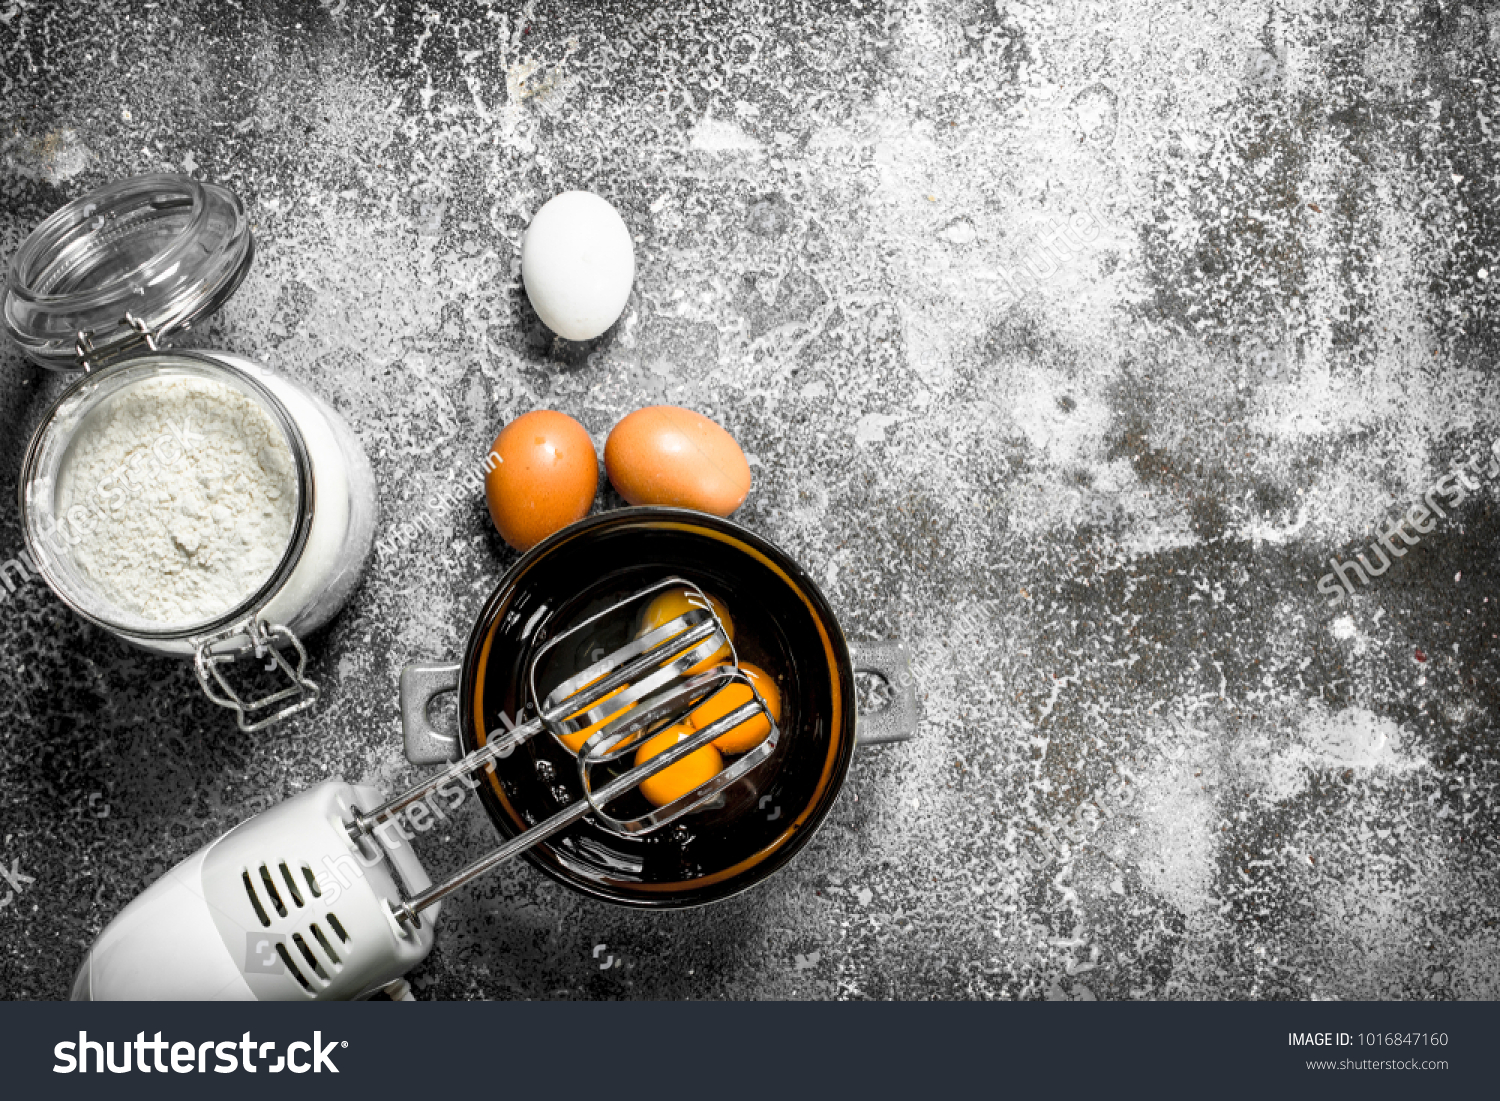 Baking background. Blend eggs with a mixer to make a dough. On a rustic background. #1016847160